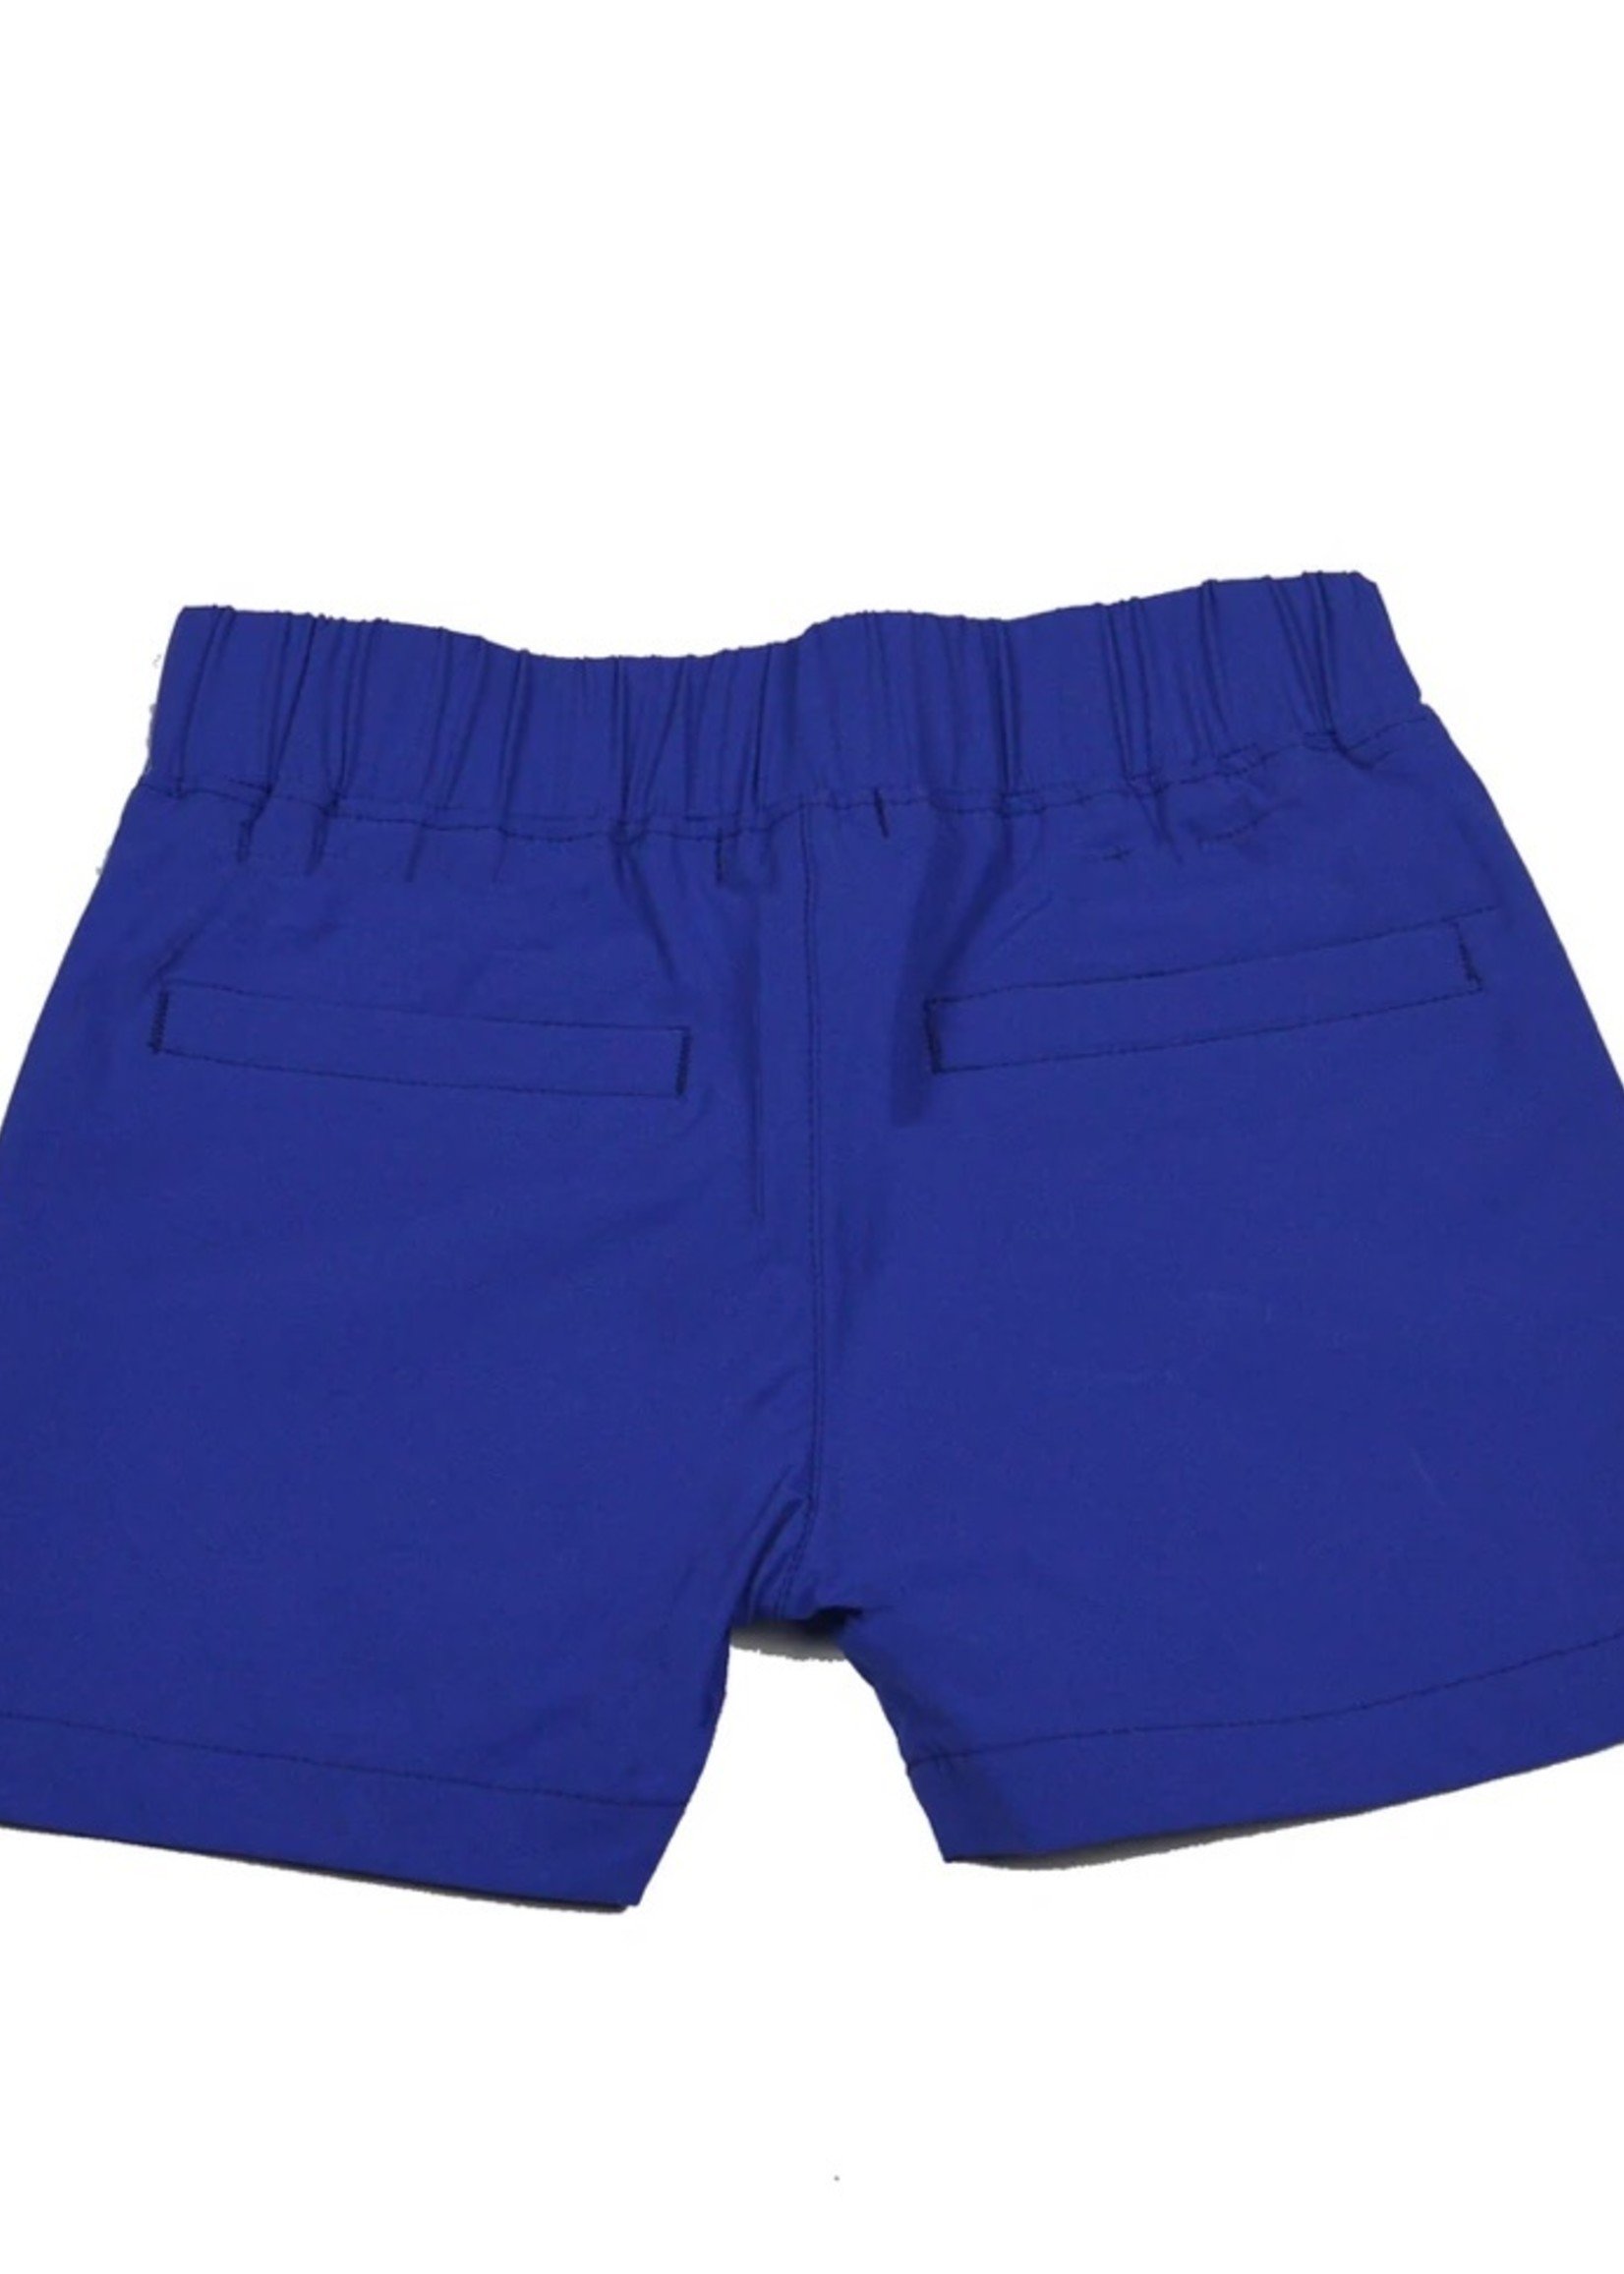 BLUEQUAIL BLUE THE EVERYDAY COLLECTION SHORTS